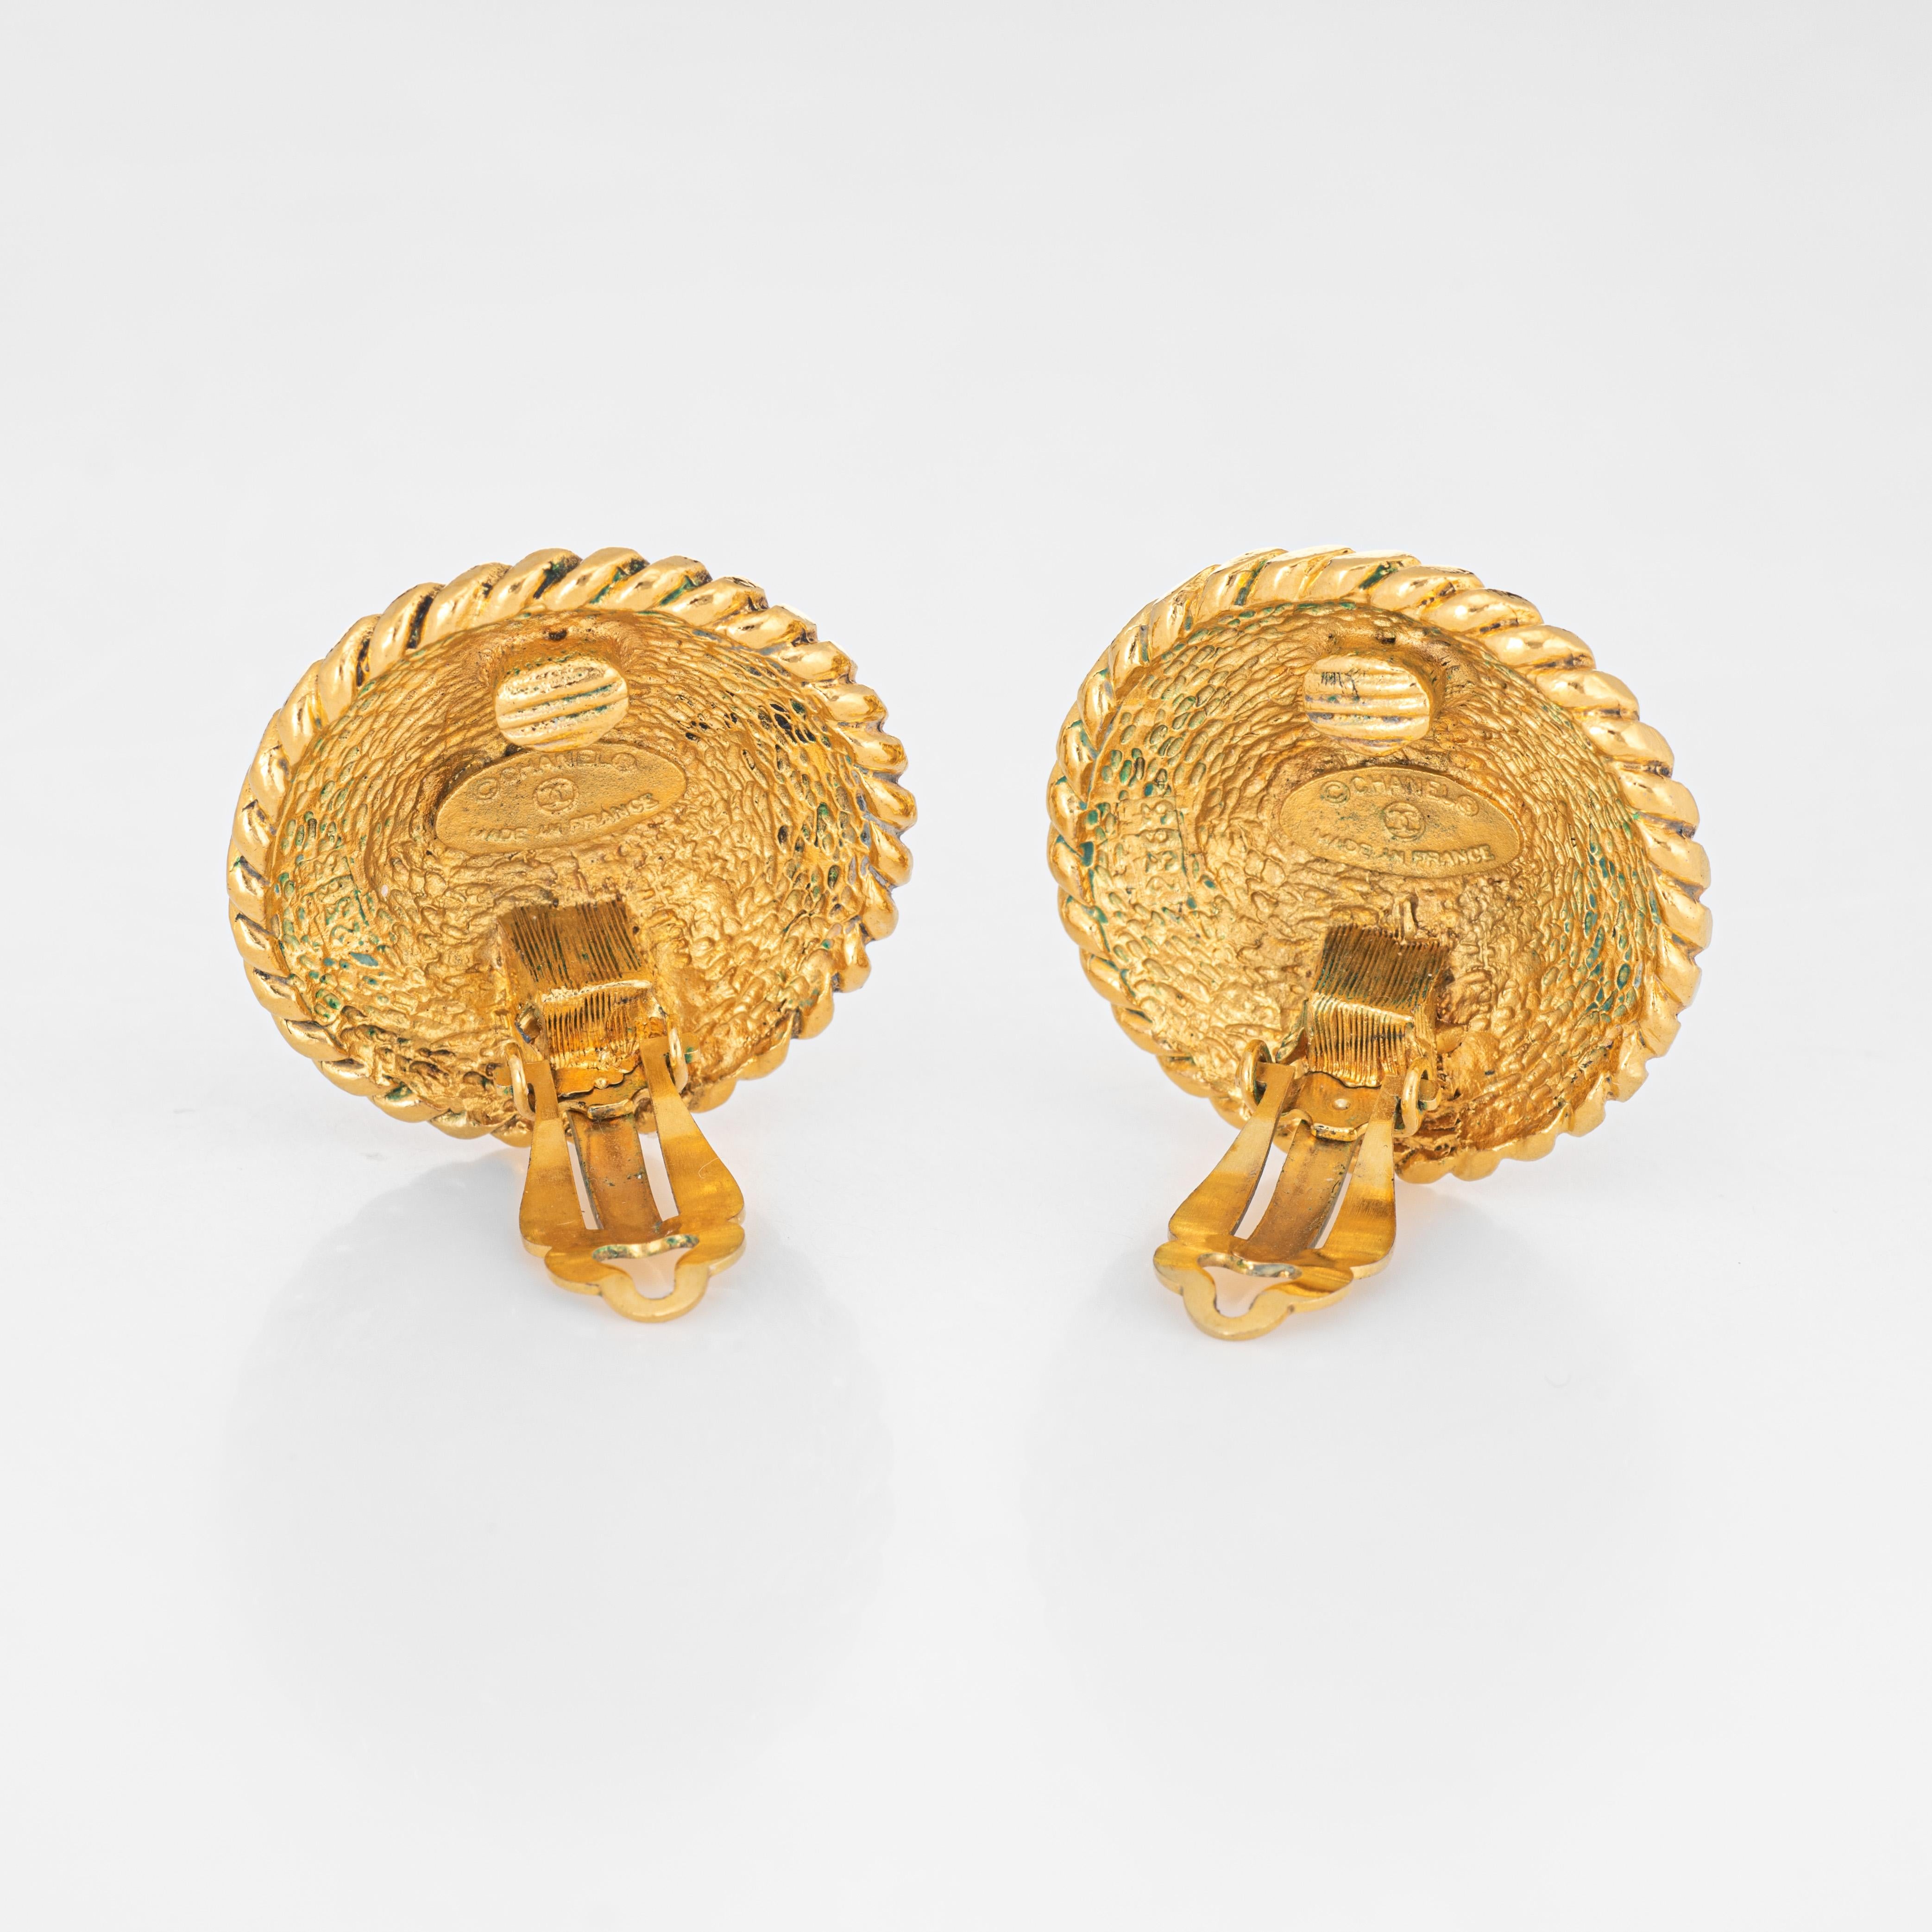 Vintage Chanel clip on earrings crafted in yellow gold tone (circa 1980s). 

The earrings feature the CC logo to the center with ornate textured detail to the outer edges. The earrings are fitted with clip on backings for non-pierced or pierced